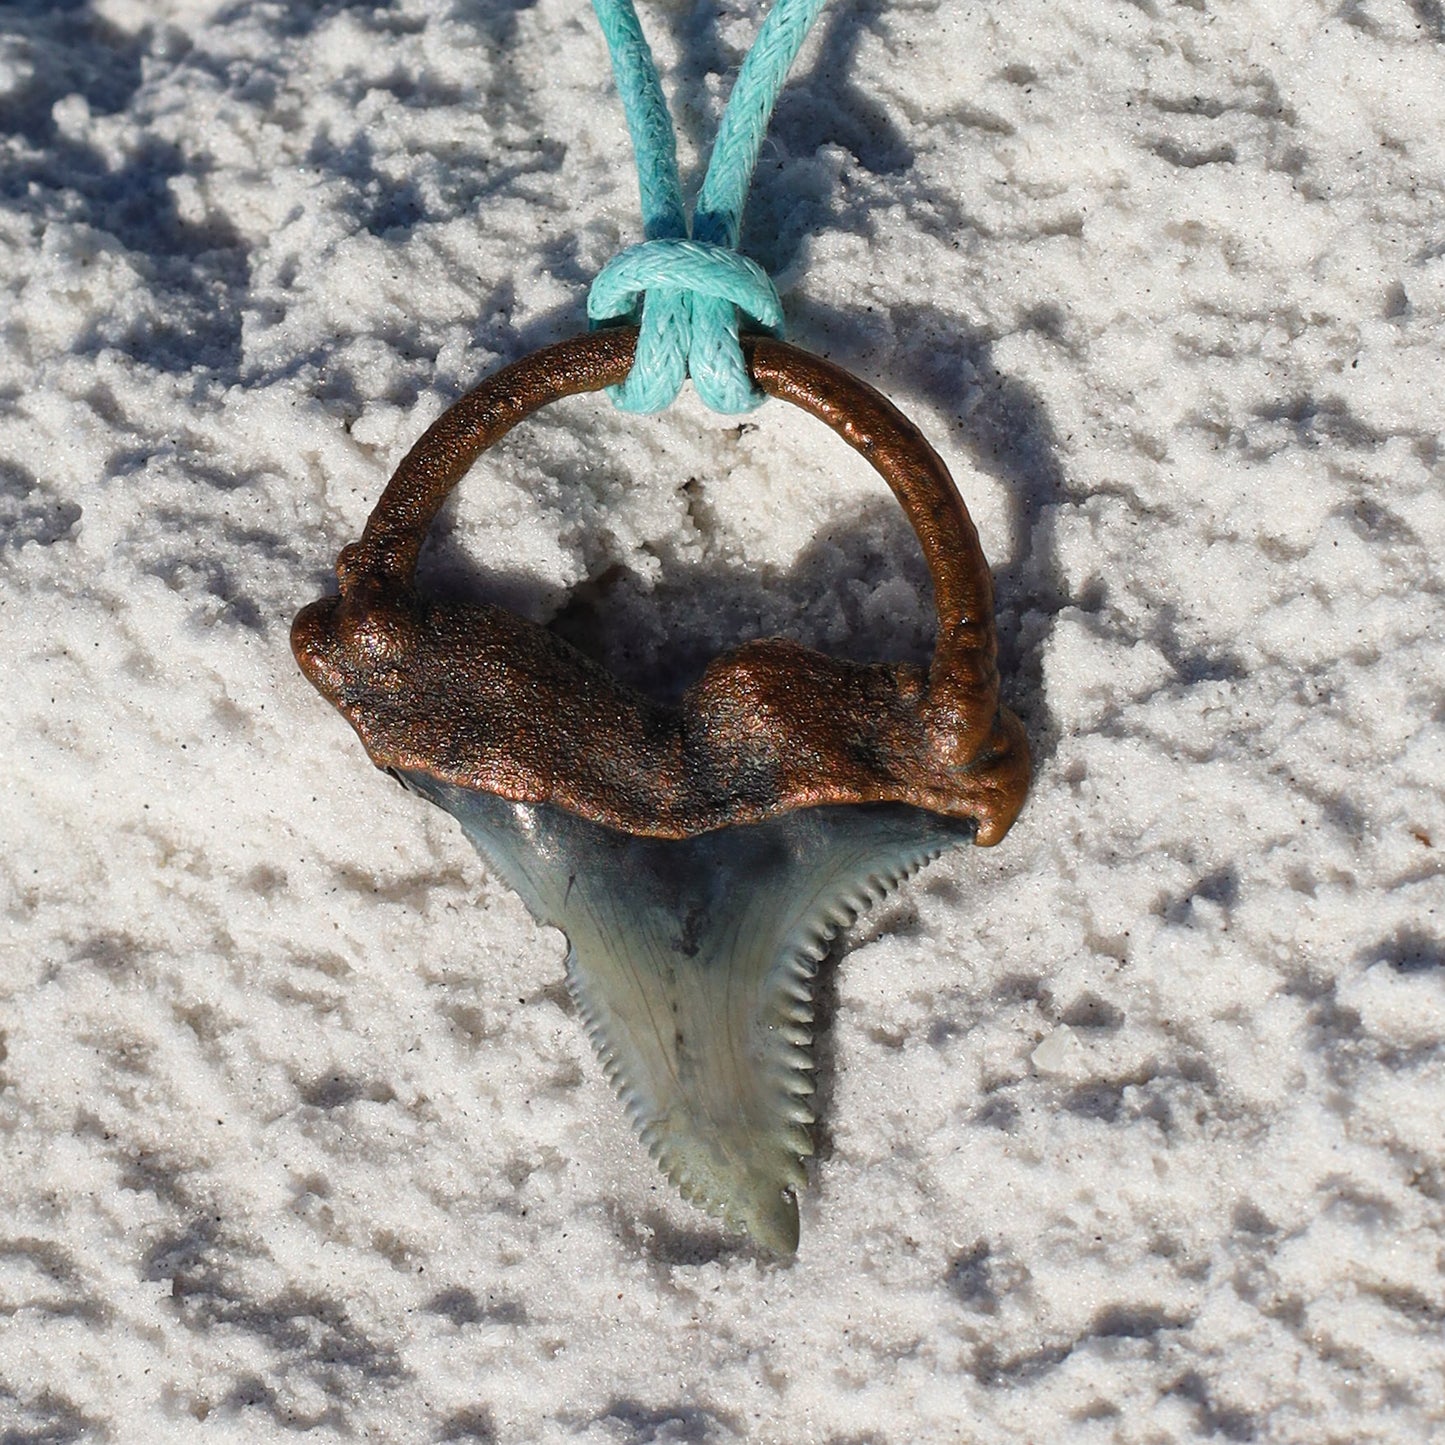 Hemi/Snaggletooth Florida Fossil Shark Tooth Copper Pendant Necklace